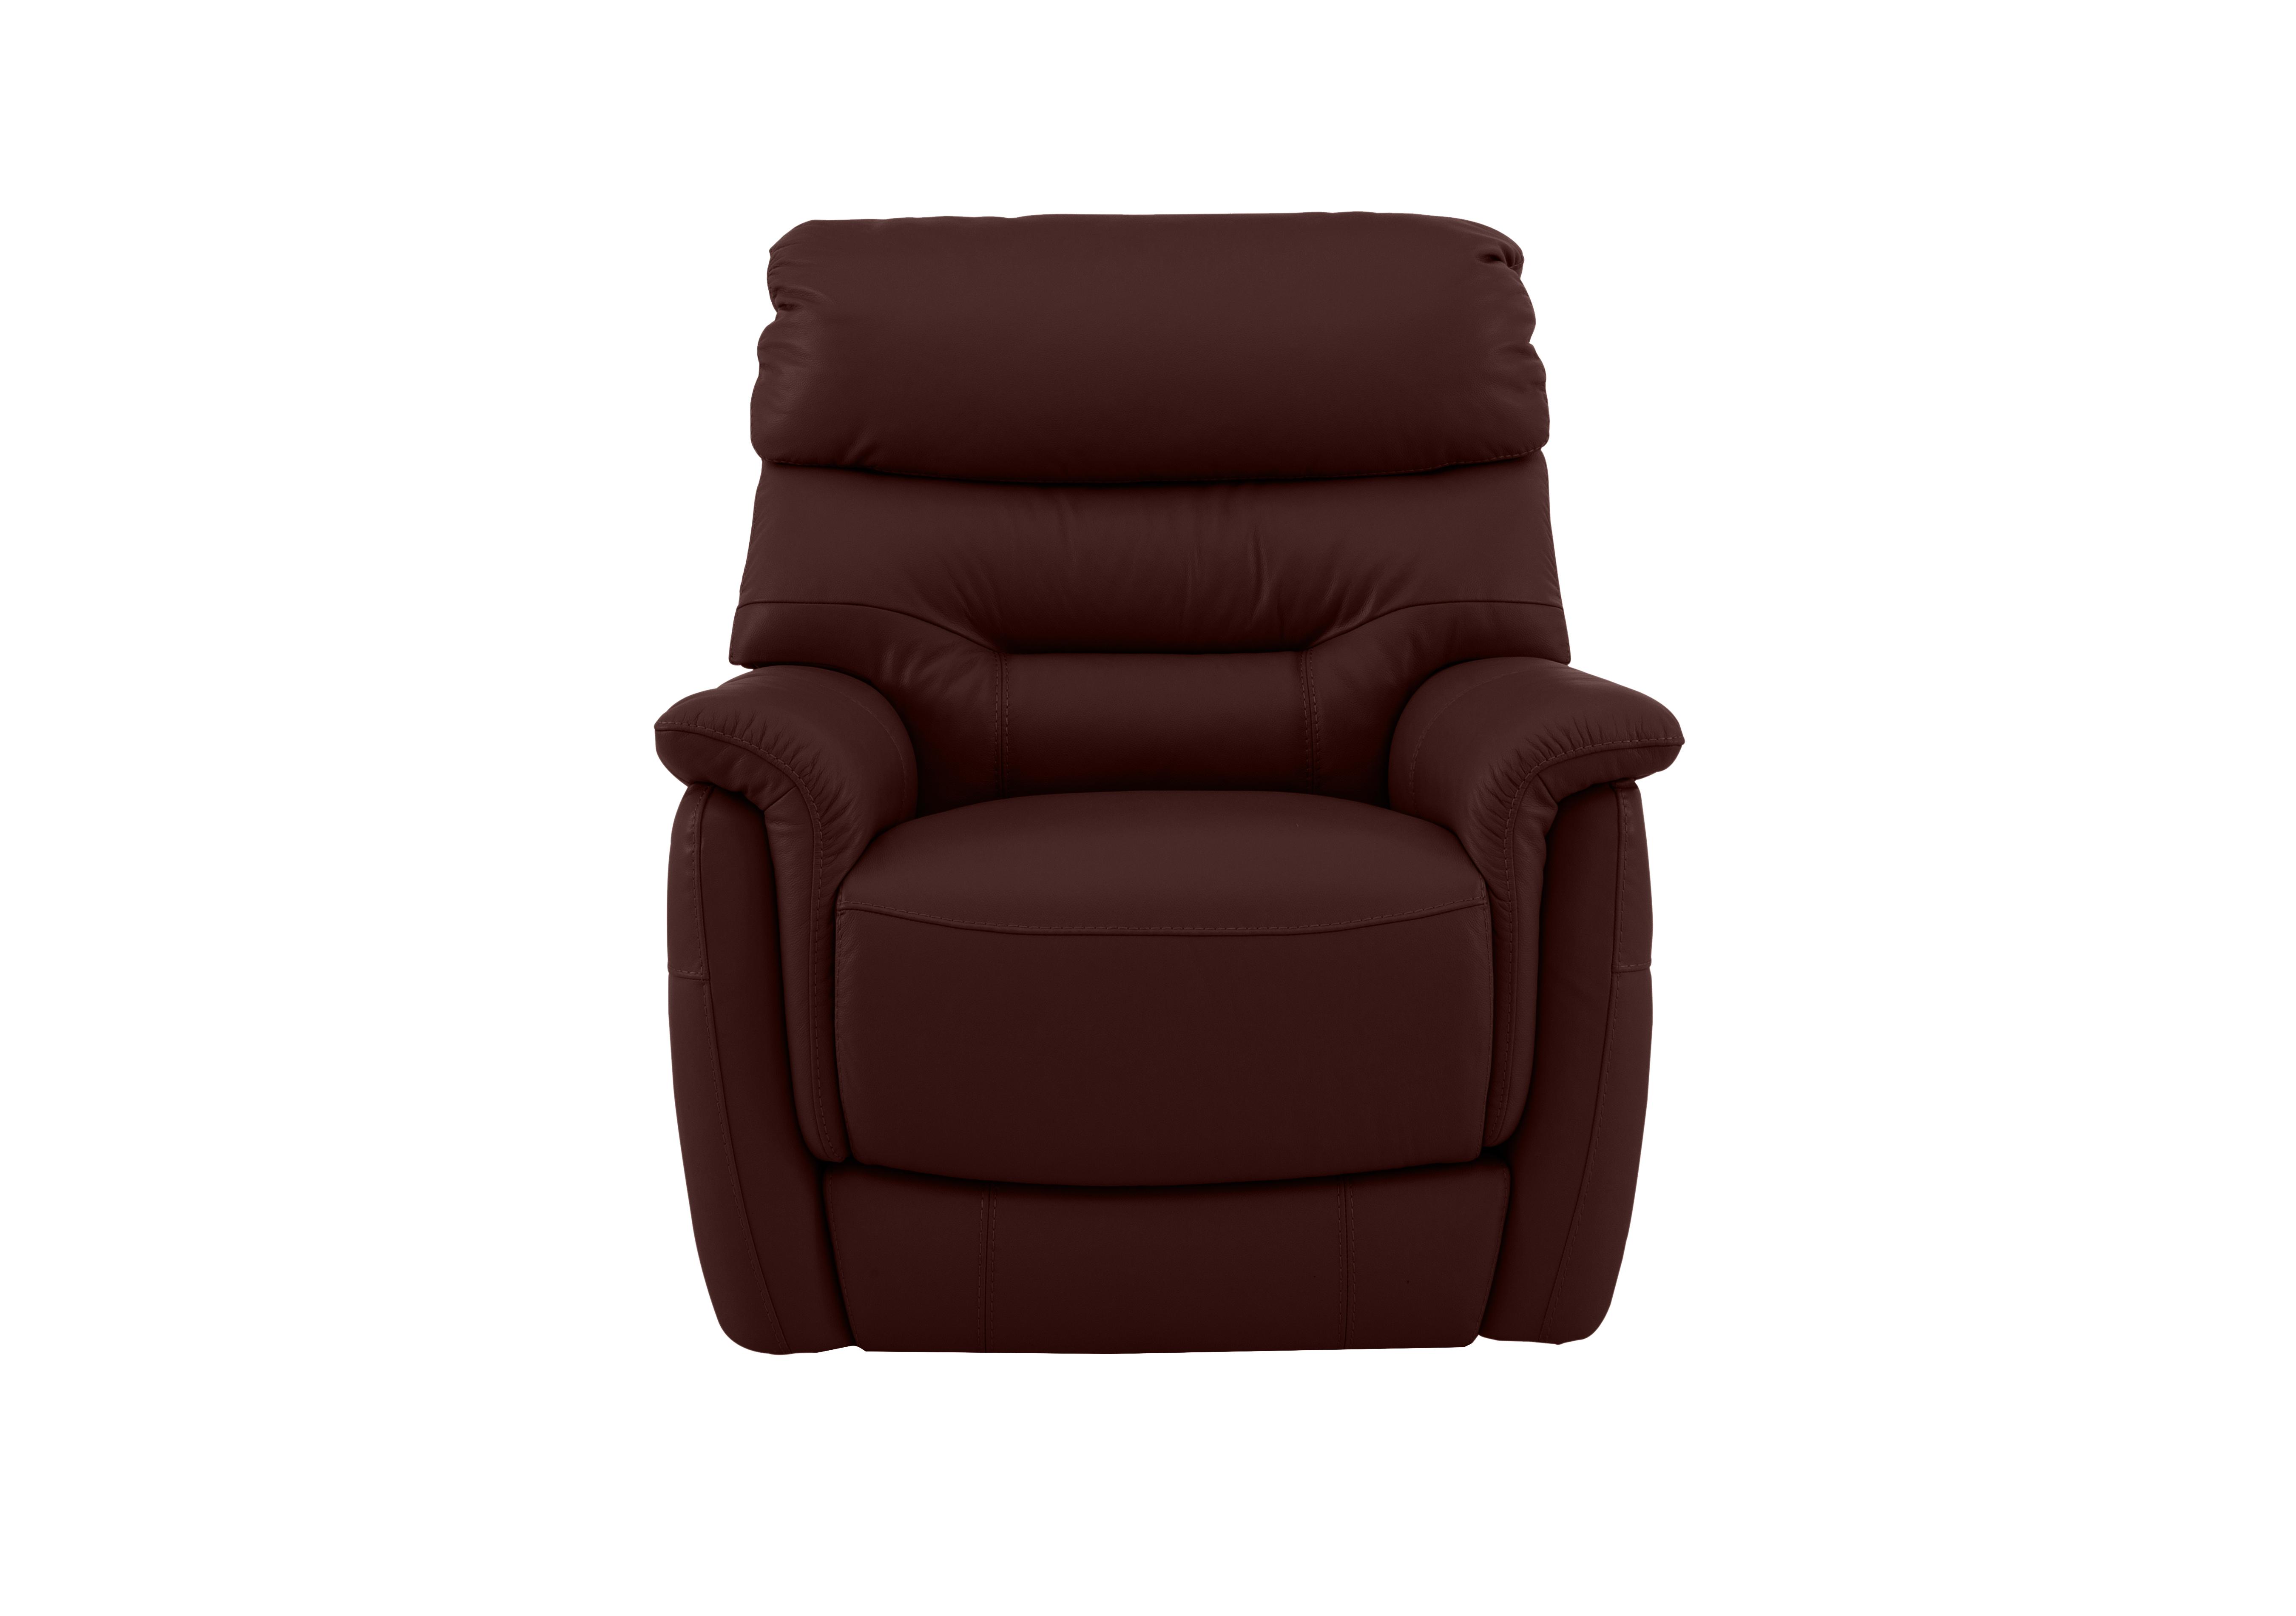 Chicago Leather Armchair in An-751b Burgundy on Furniture Village